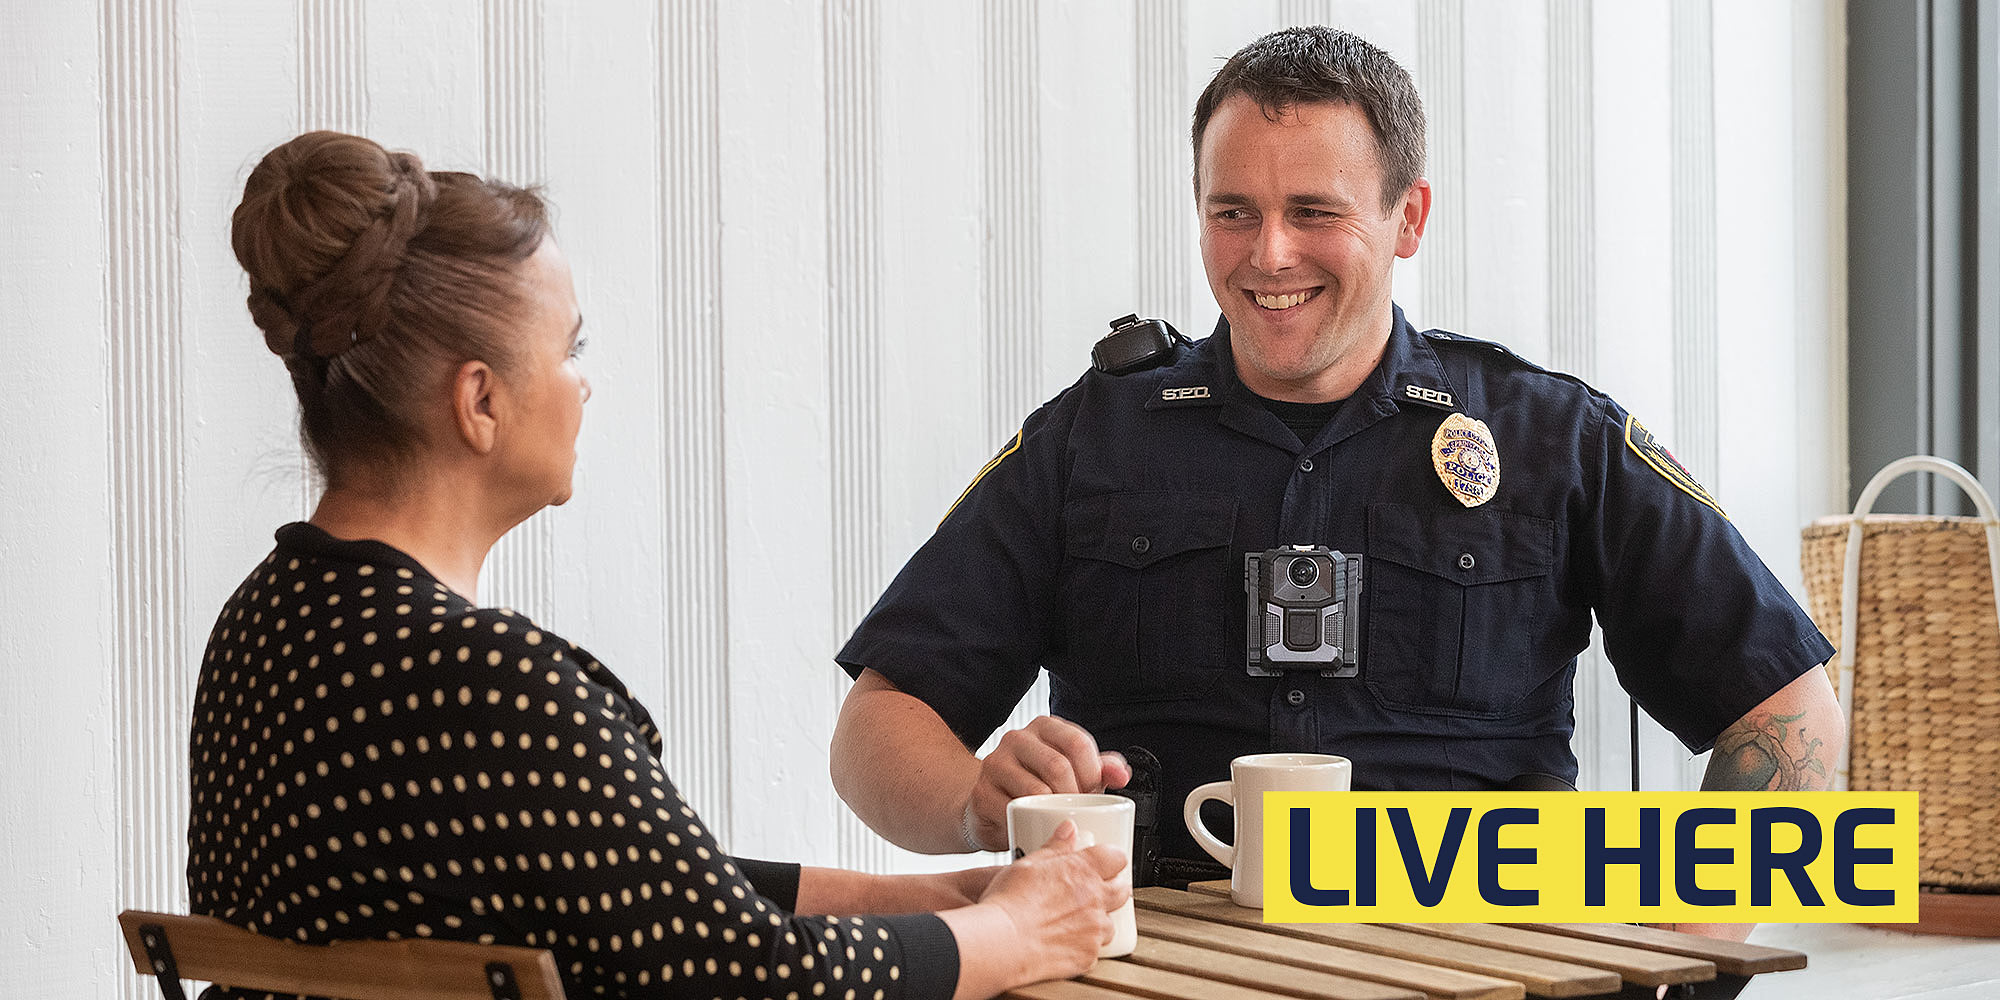 live here: police officer shares coffee with a citizen in a coffee shop